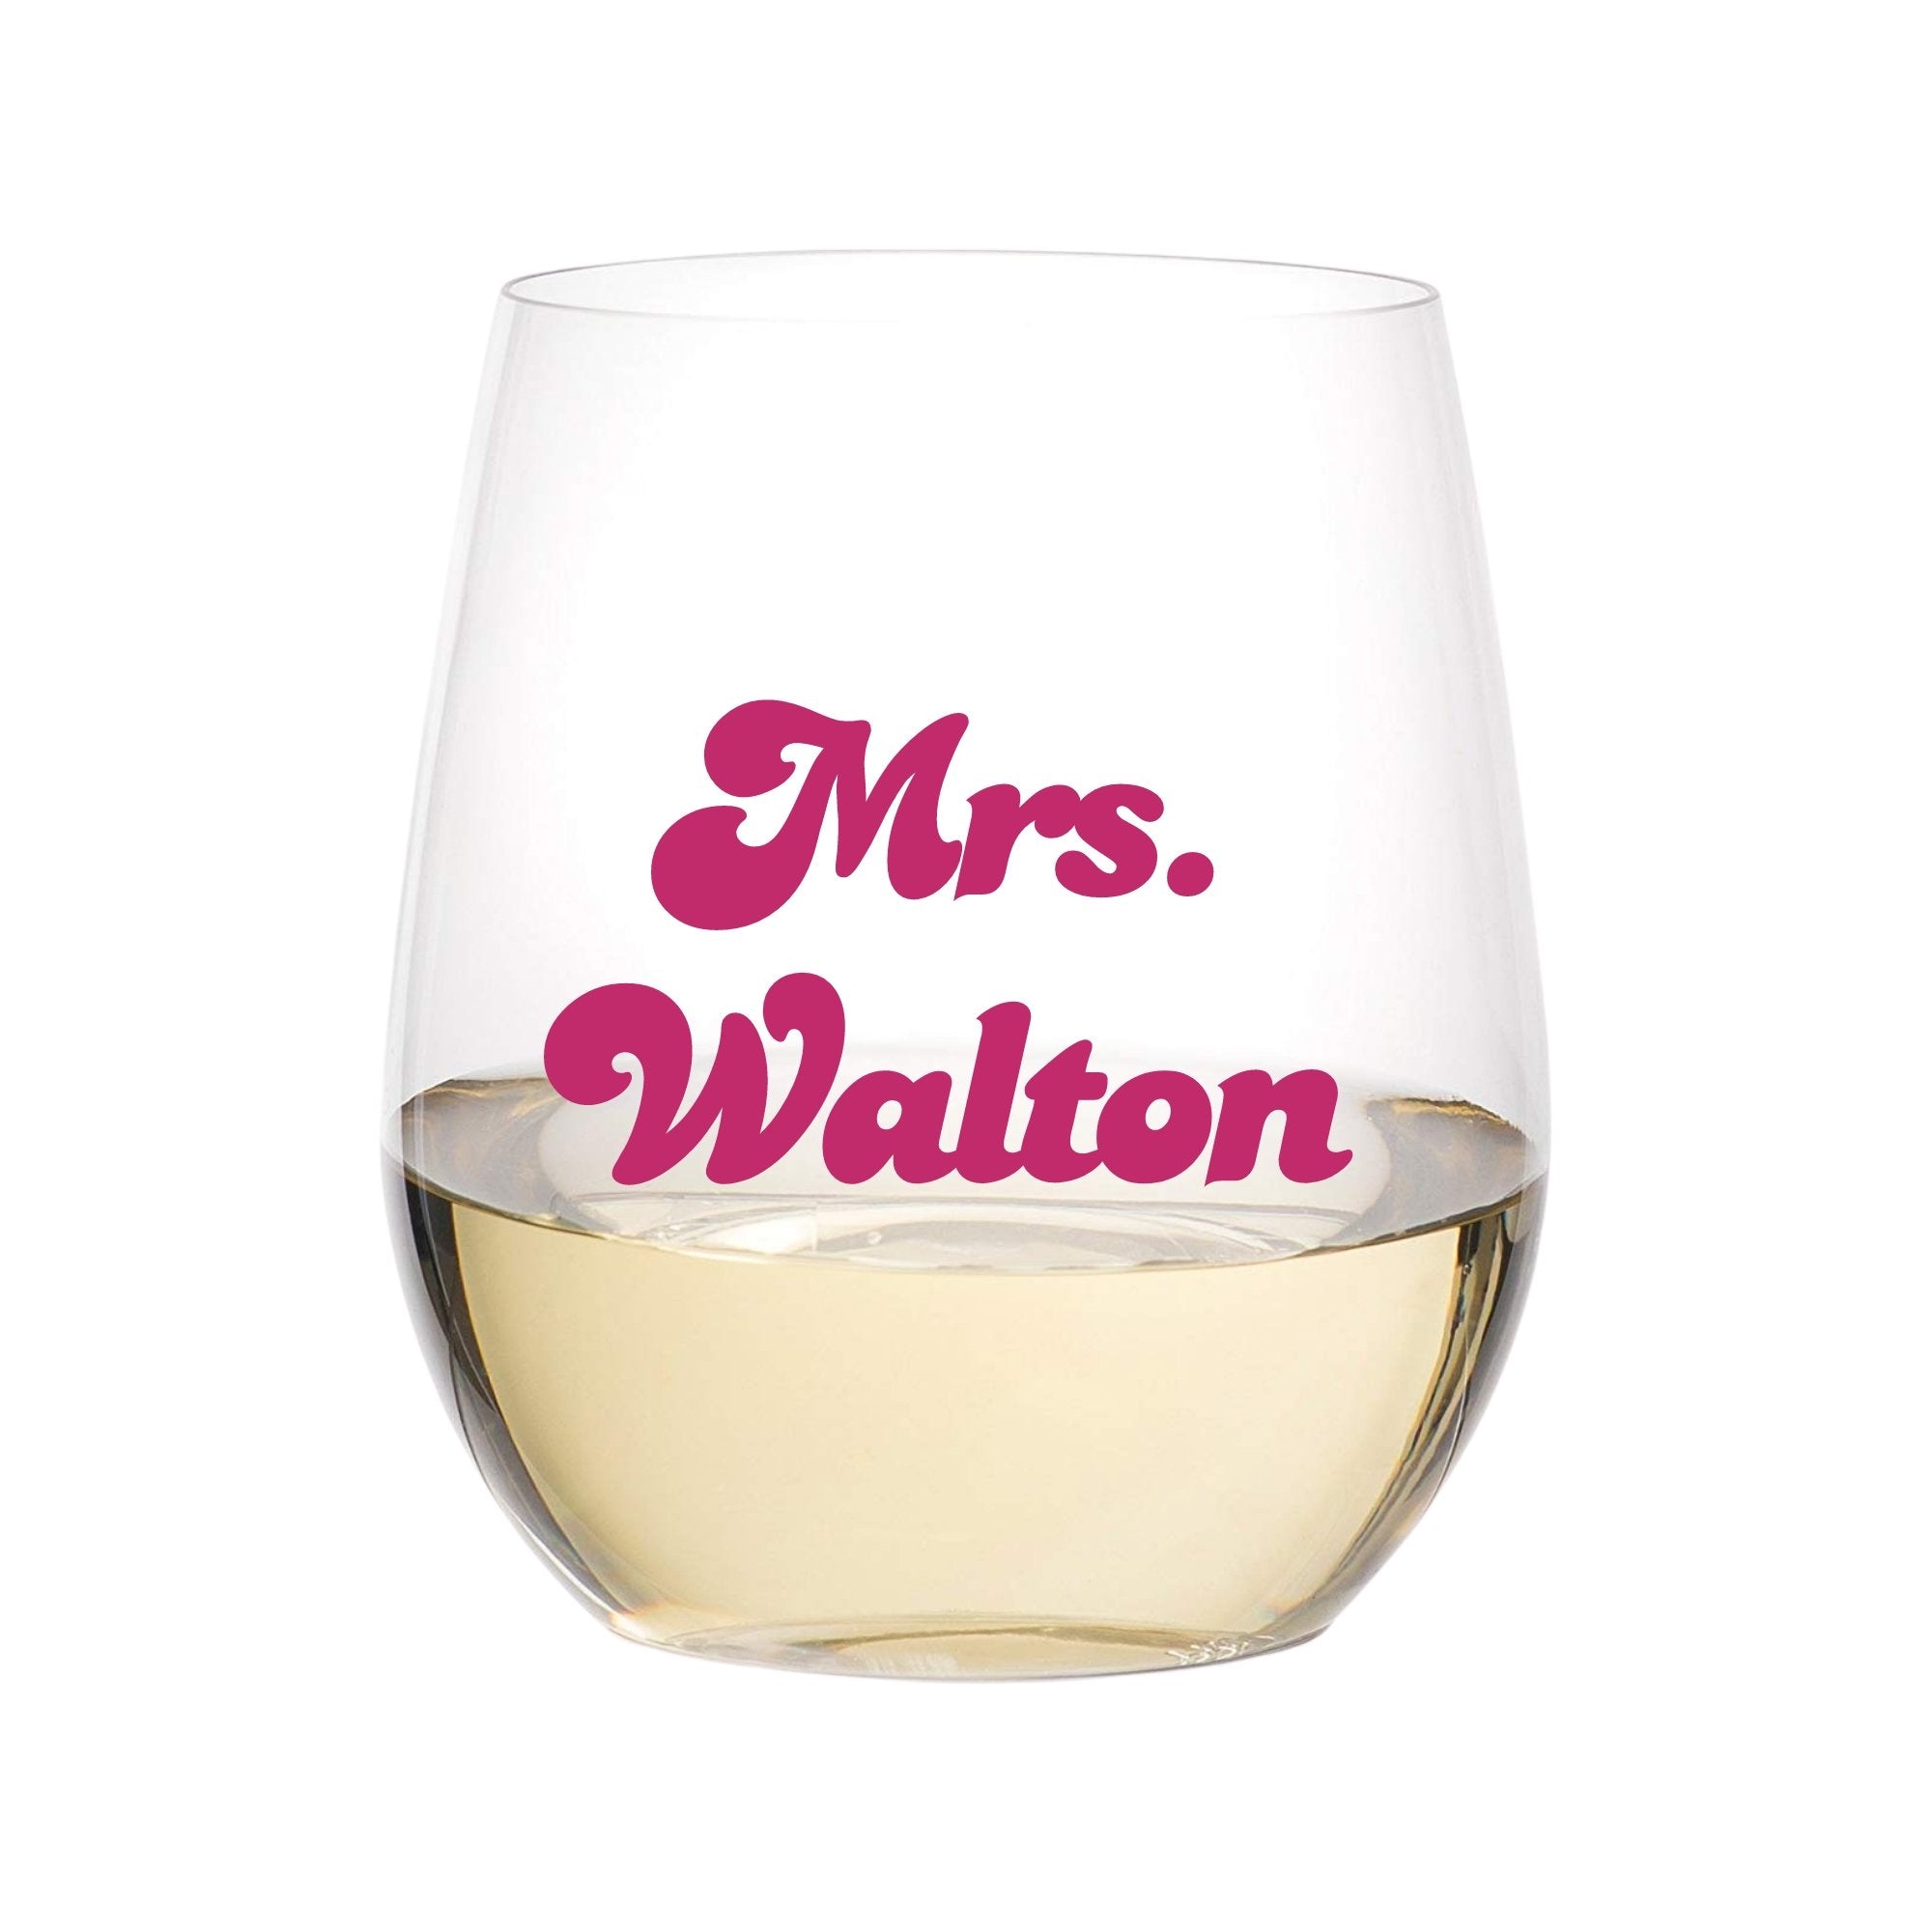 A clear acrylic wine glass reads "Mrs. Walton" in a retro font